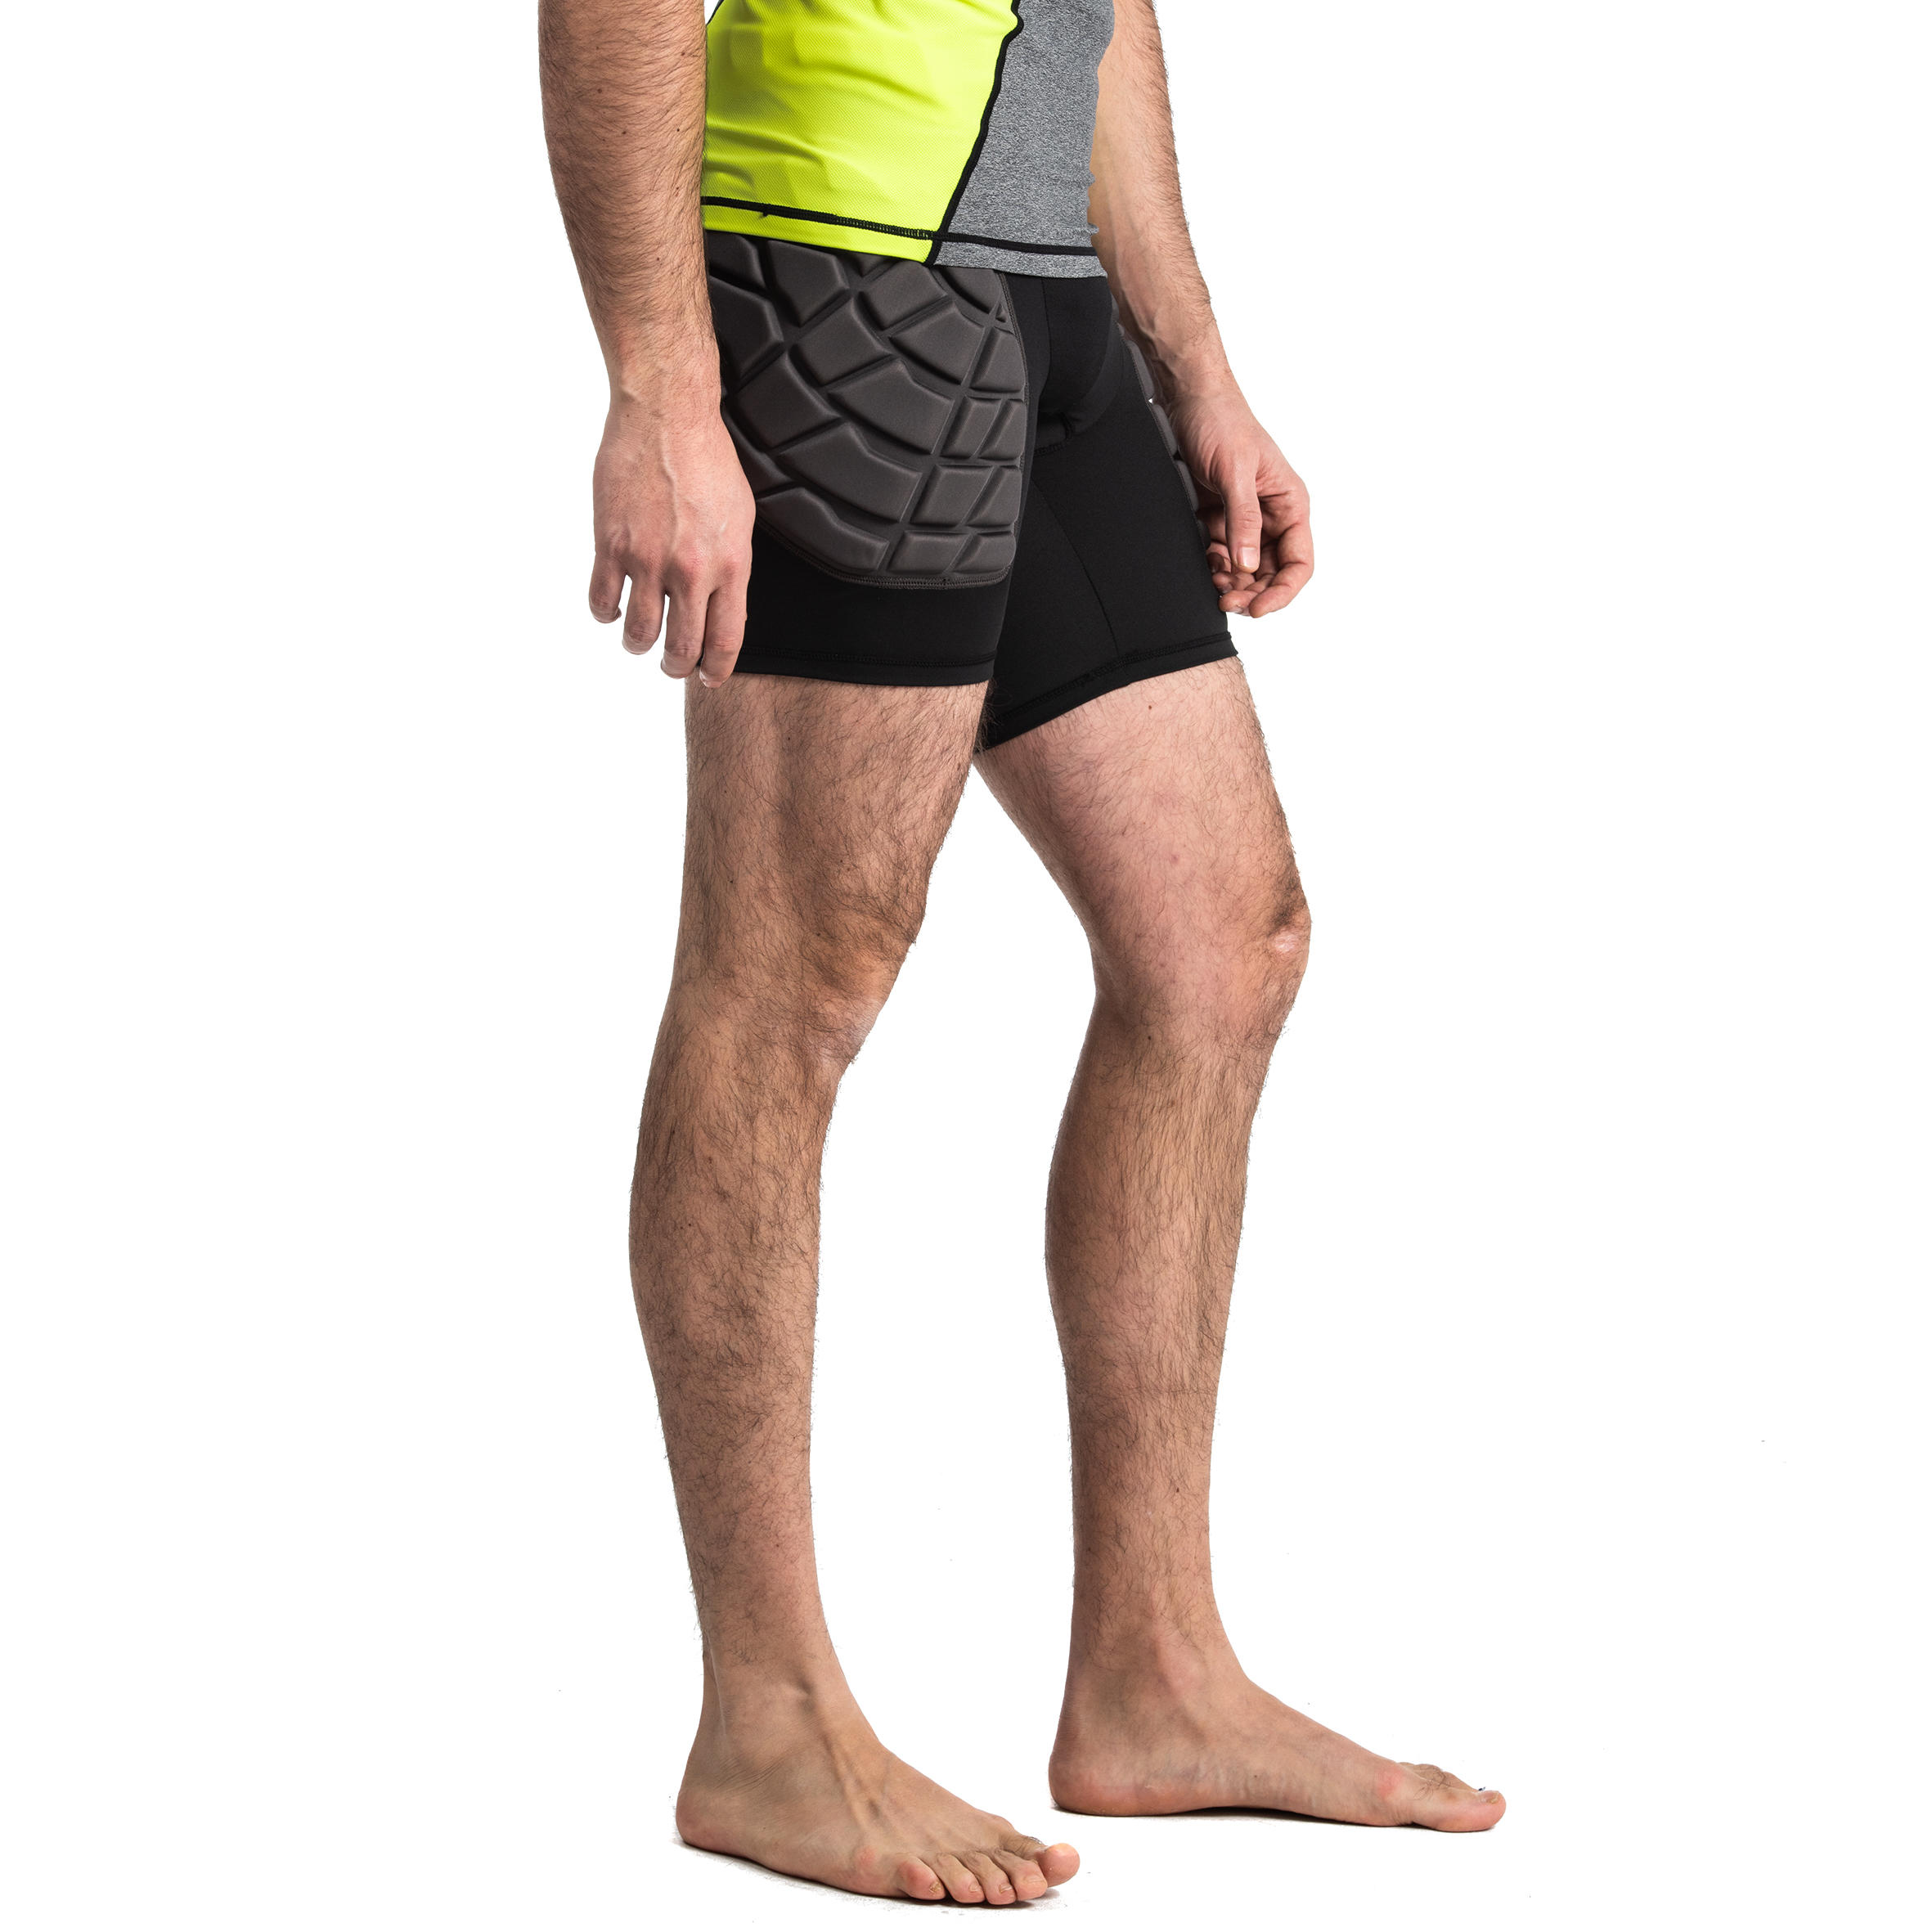 Men's Protective Rugby Undershorts R500 - Black/Yellow 9/9